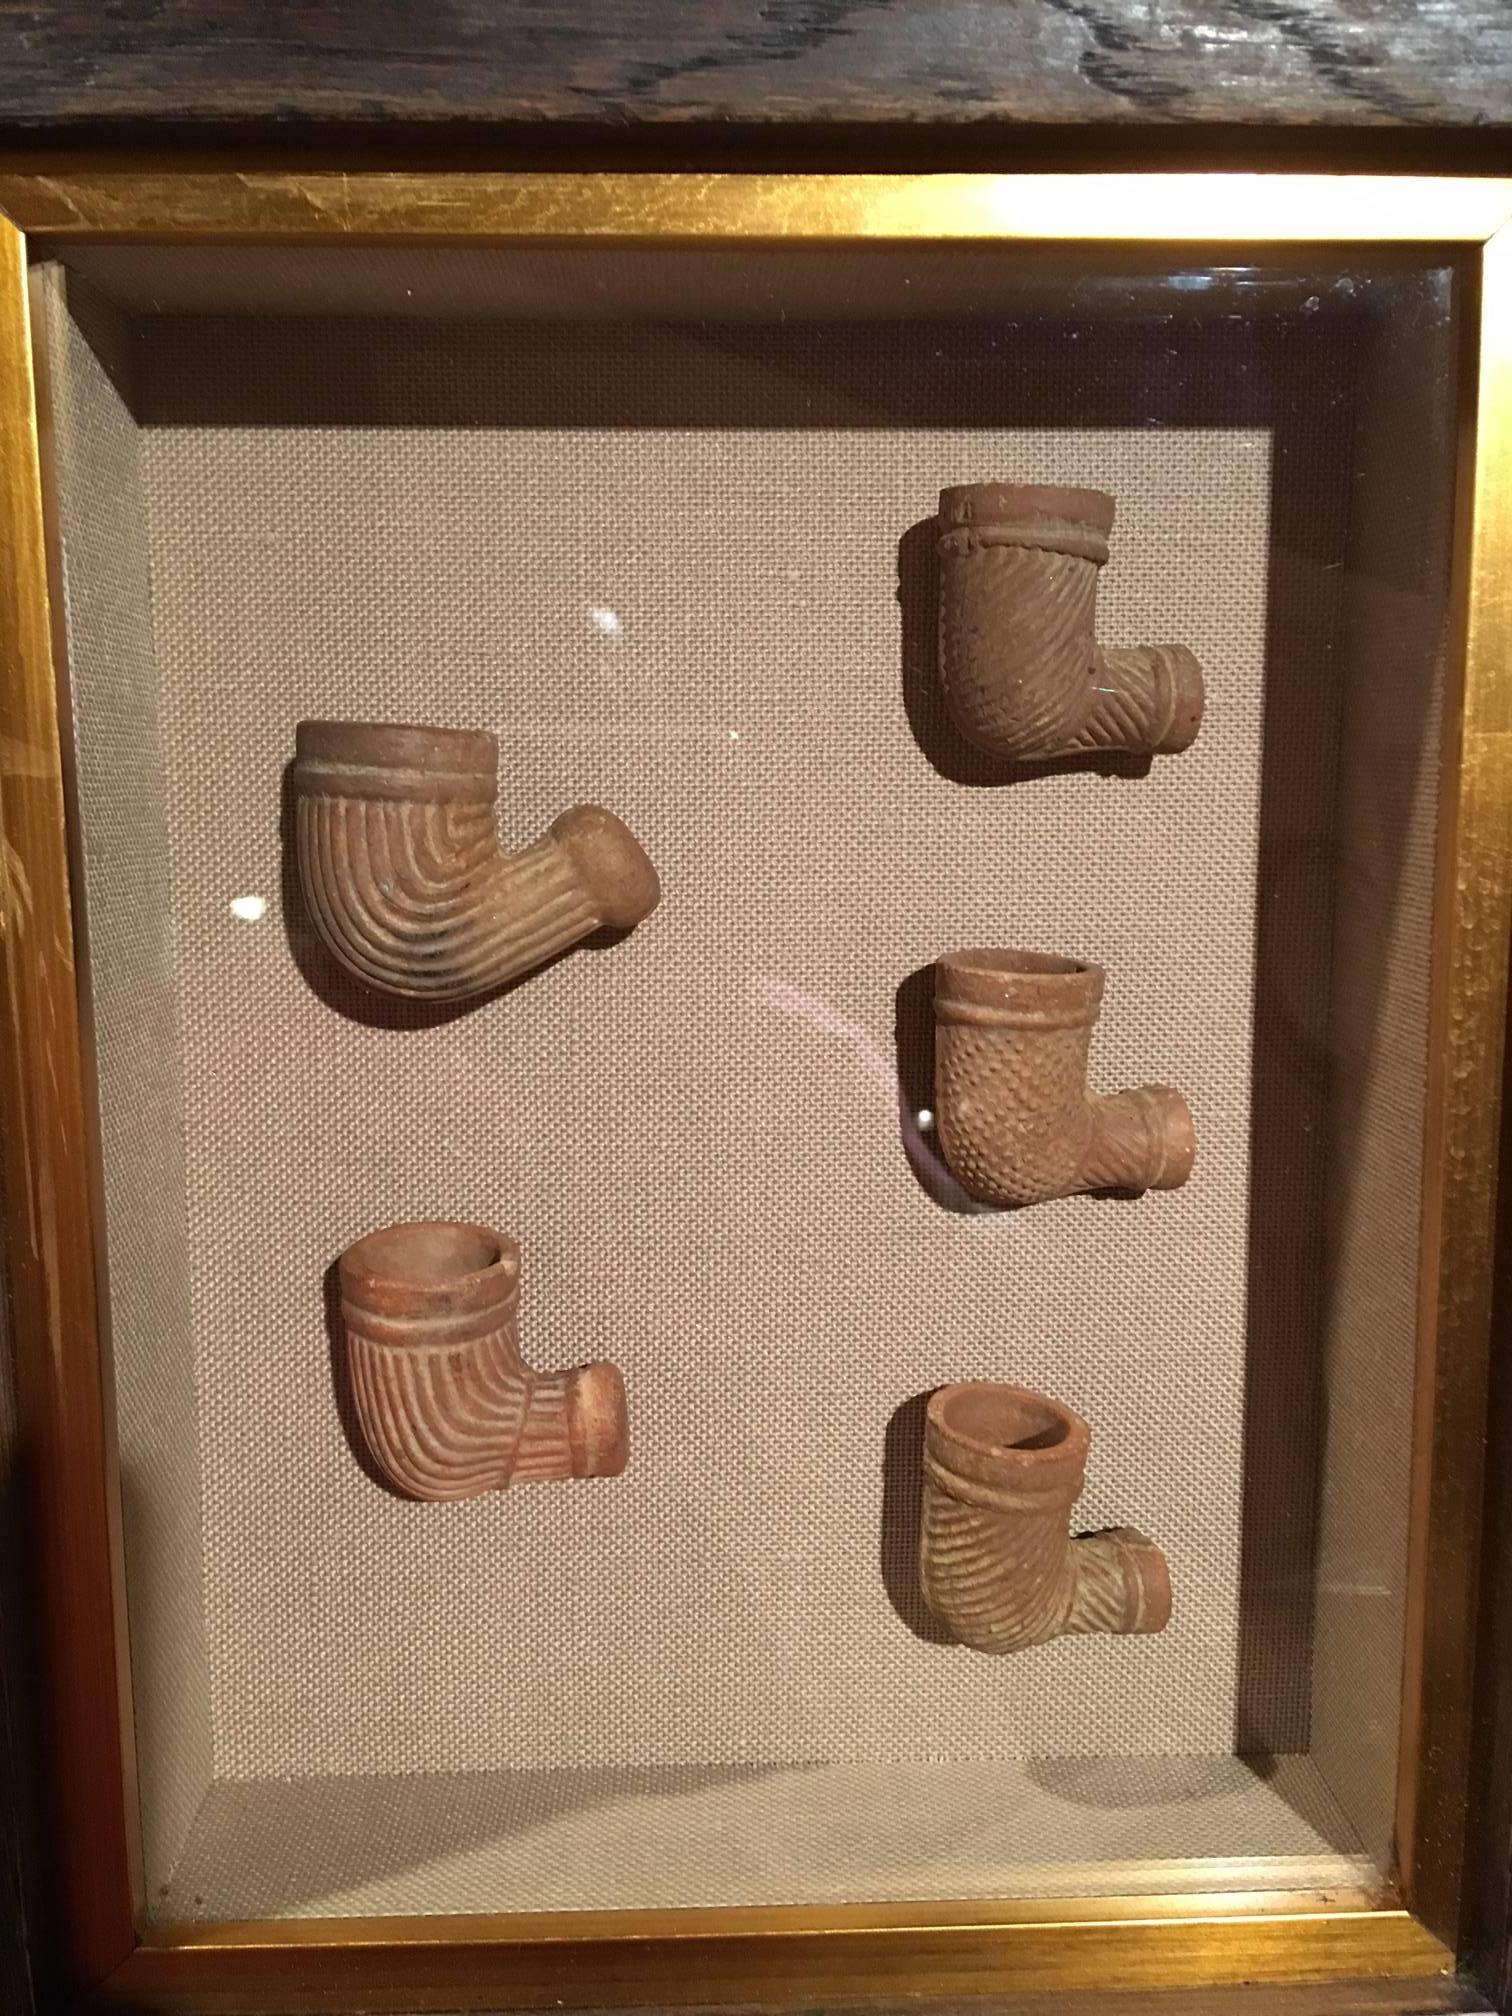 American Set of Five Terracotta Pipes Framed in a Shadow Box, 19th Century